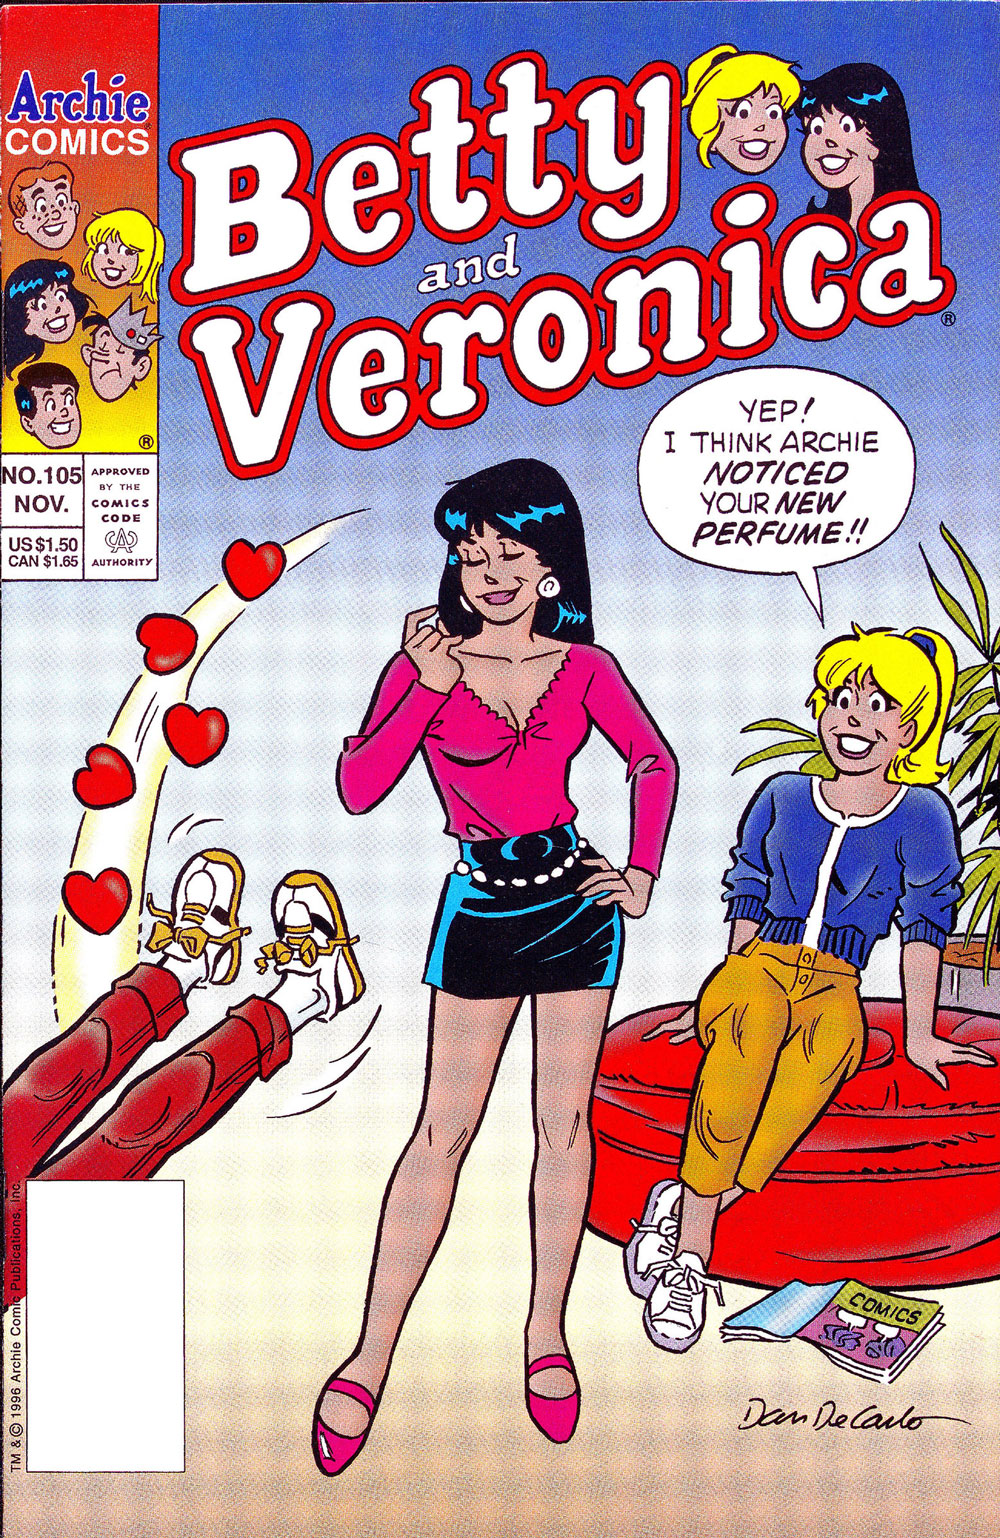 Cover of BETTY AND VERONICA #105. Archie has just fainted in Veronica's presence. Betty says, "Yep! I think Archie noticed your new perfume!"